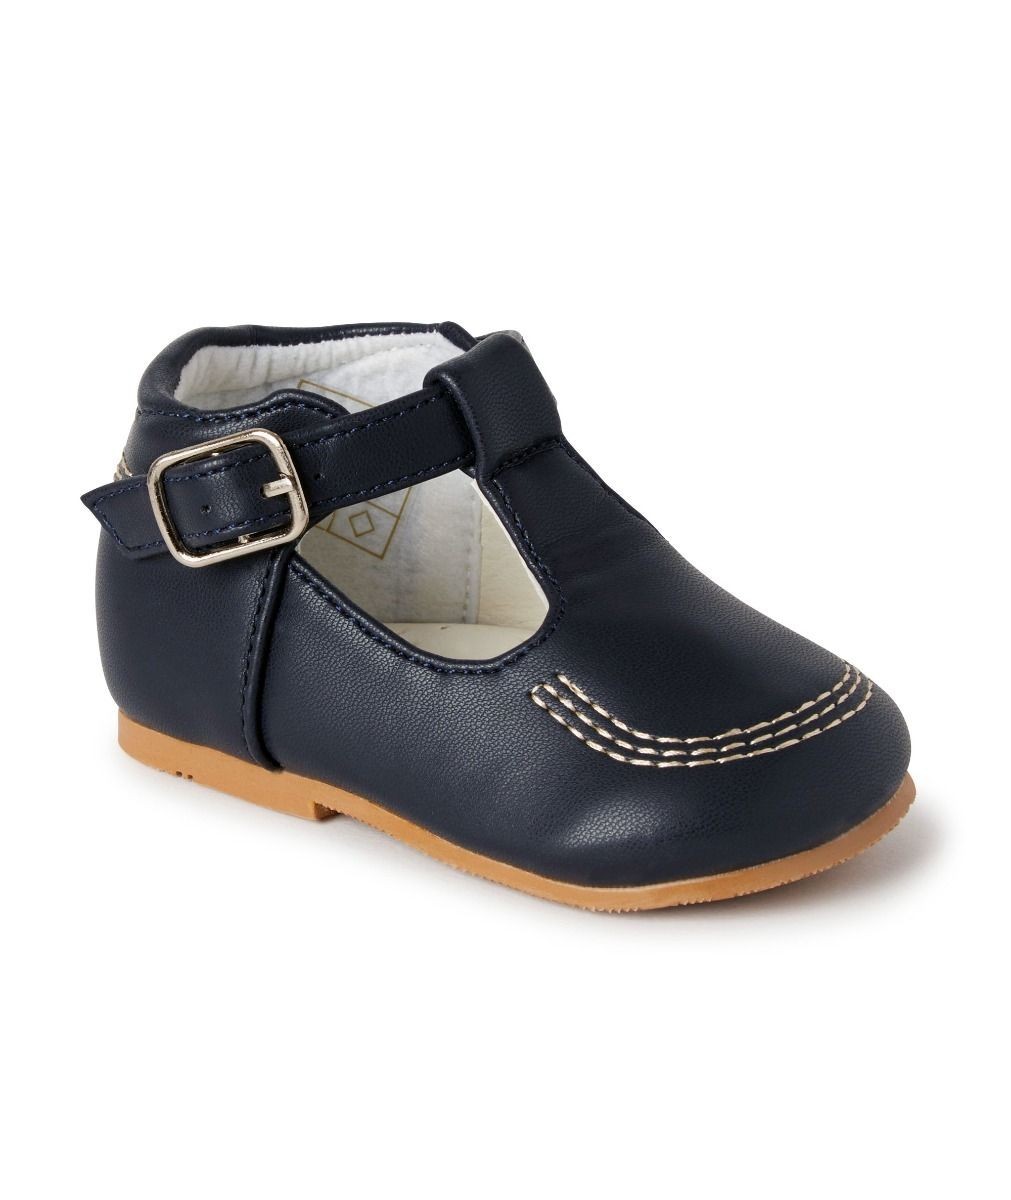 Baby & Boys Buckled Leather Shoes – TEDDY